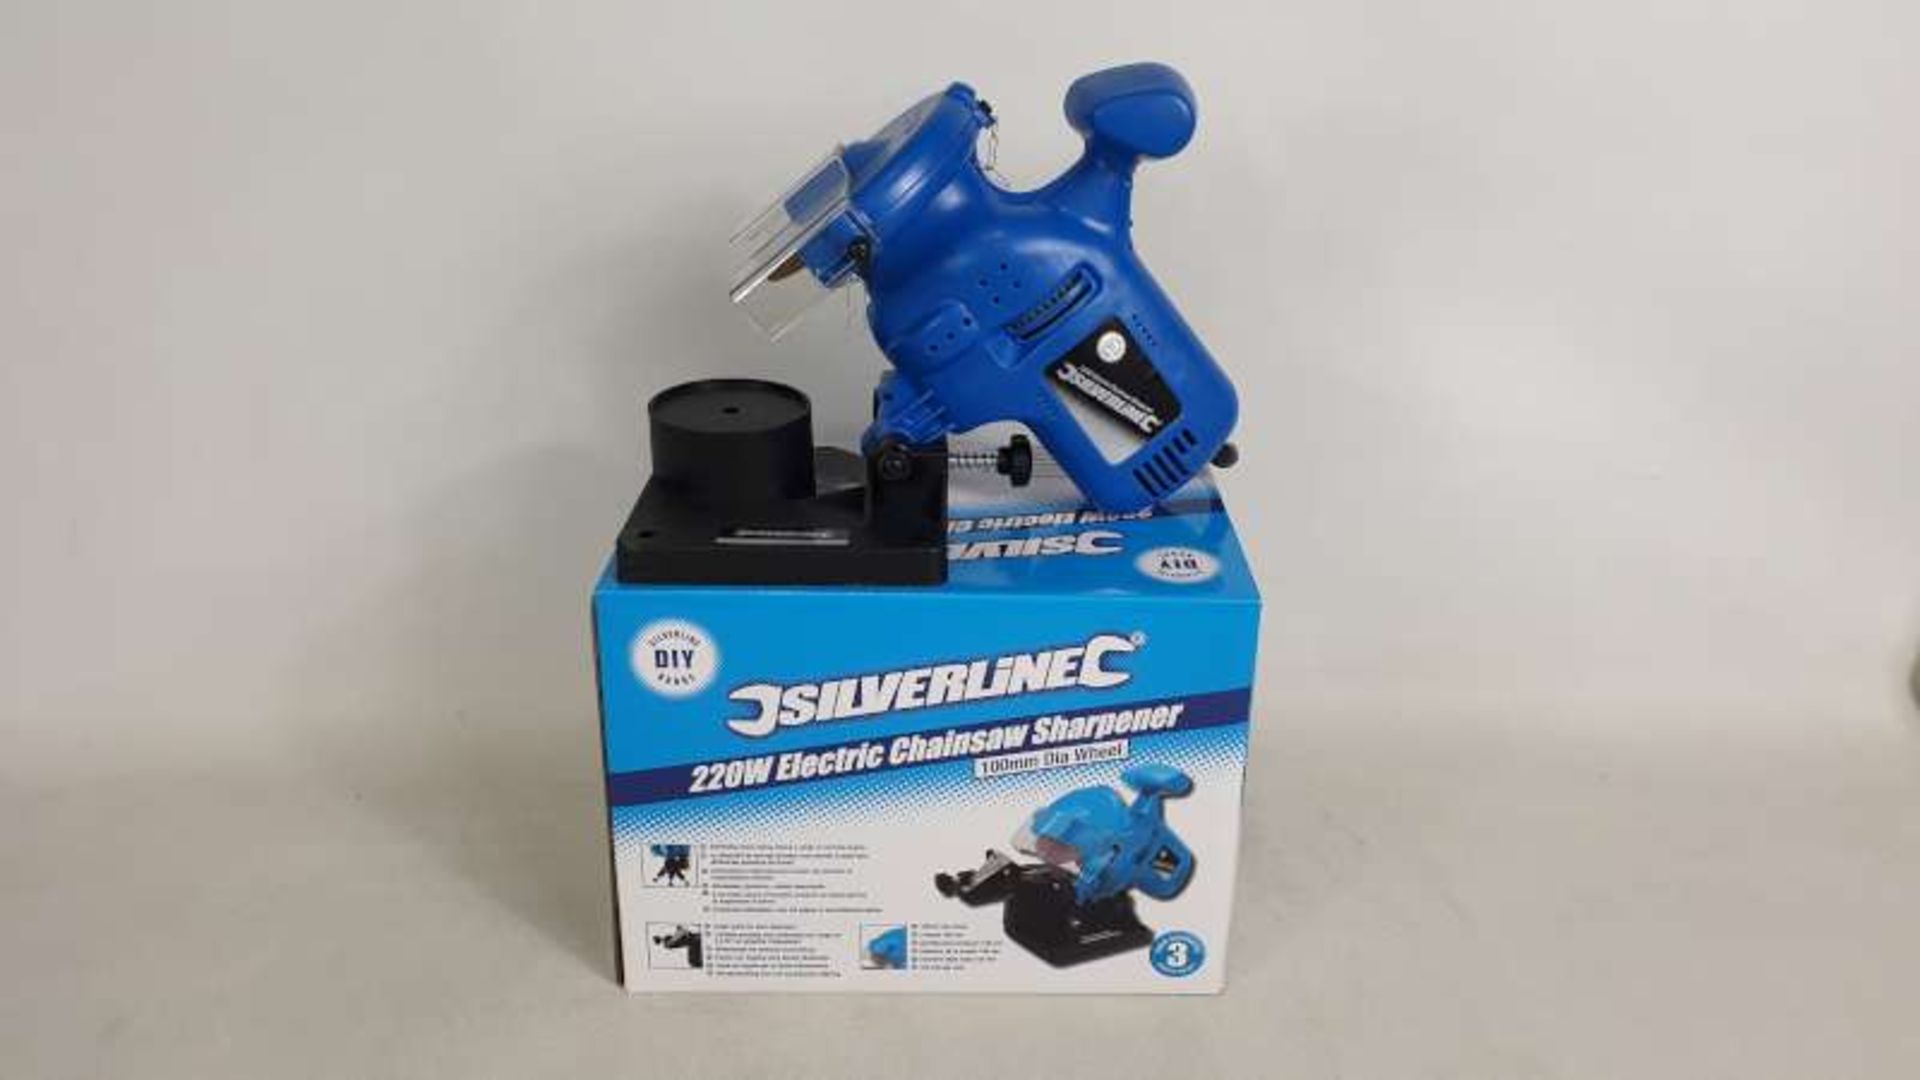 6 X BRAND NEW BOXED SILVERLINE 220 WATT ELECTRIC CHAINSAW SHARPENERS WITH 100MM DIA WHEEL AND 3